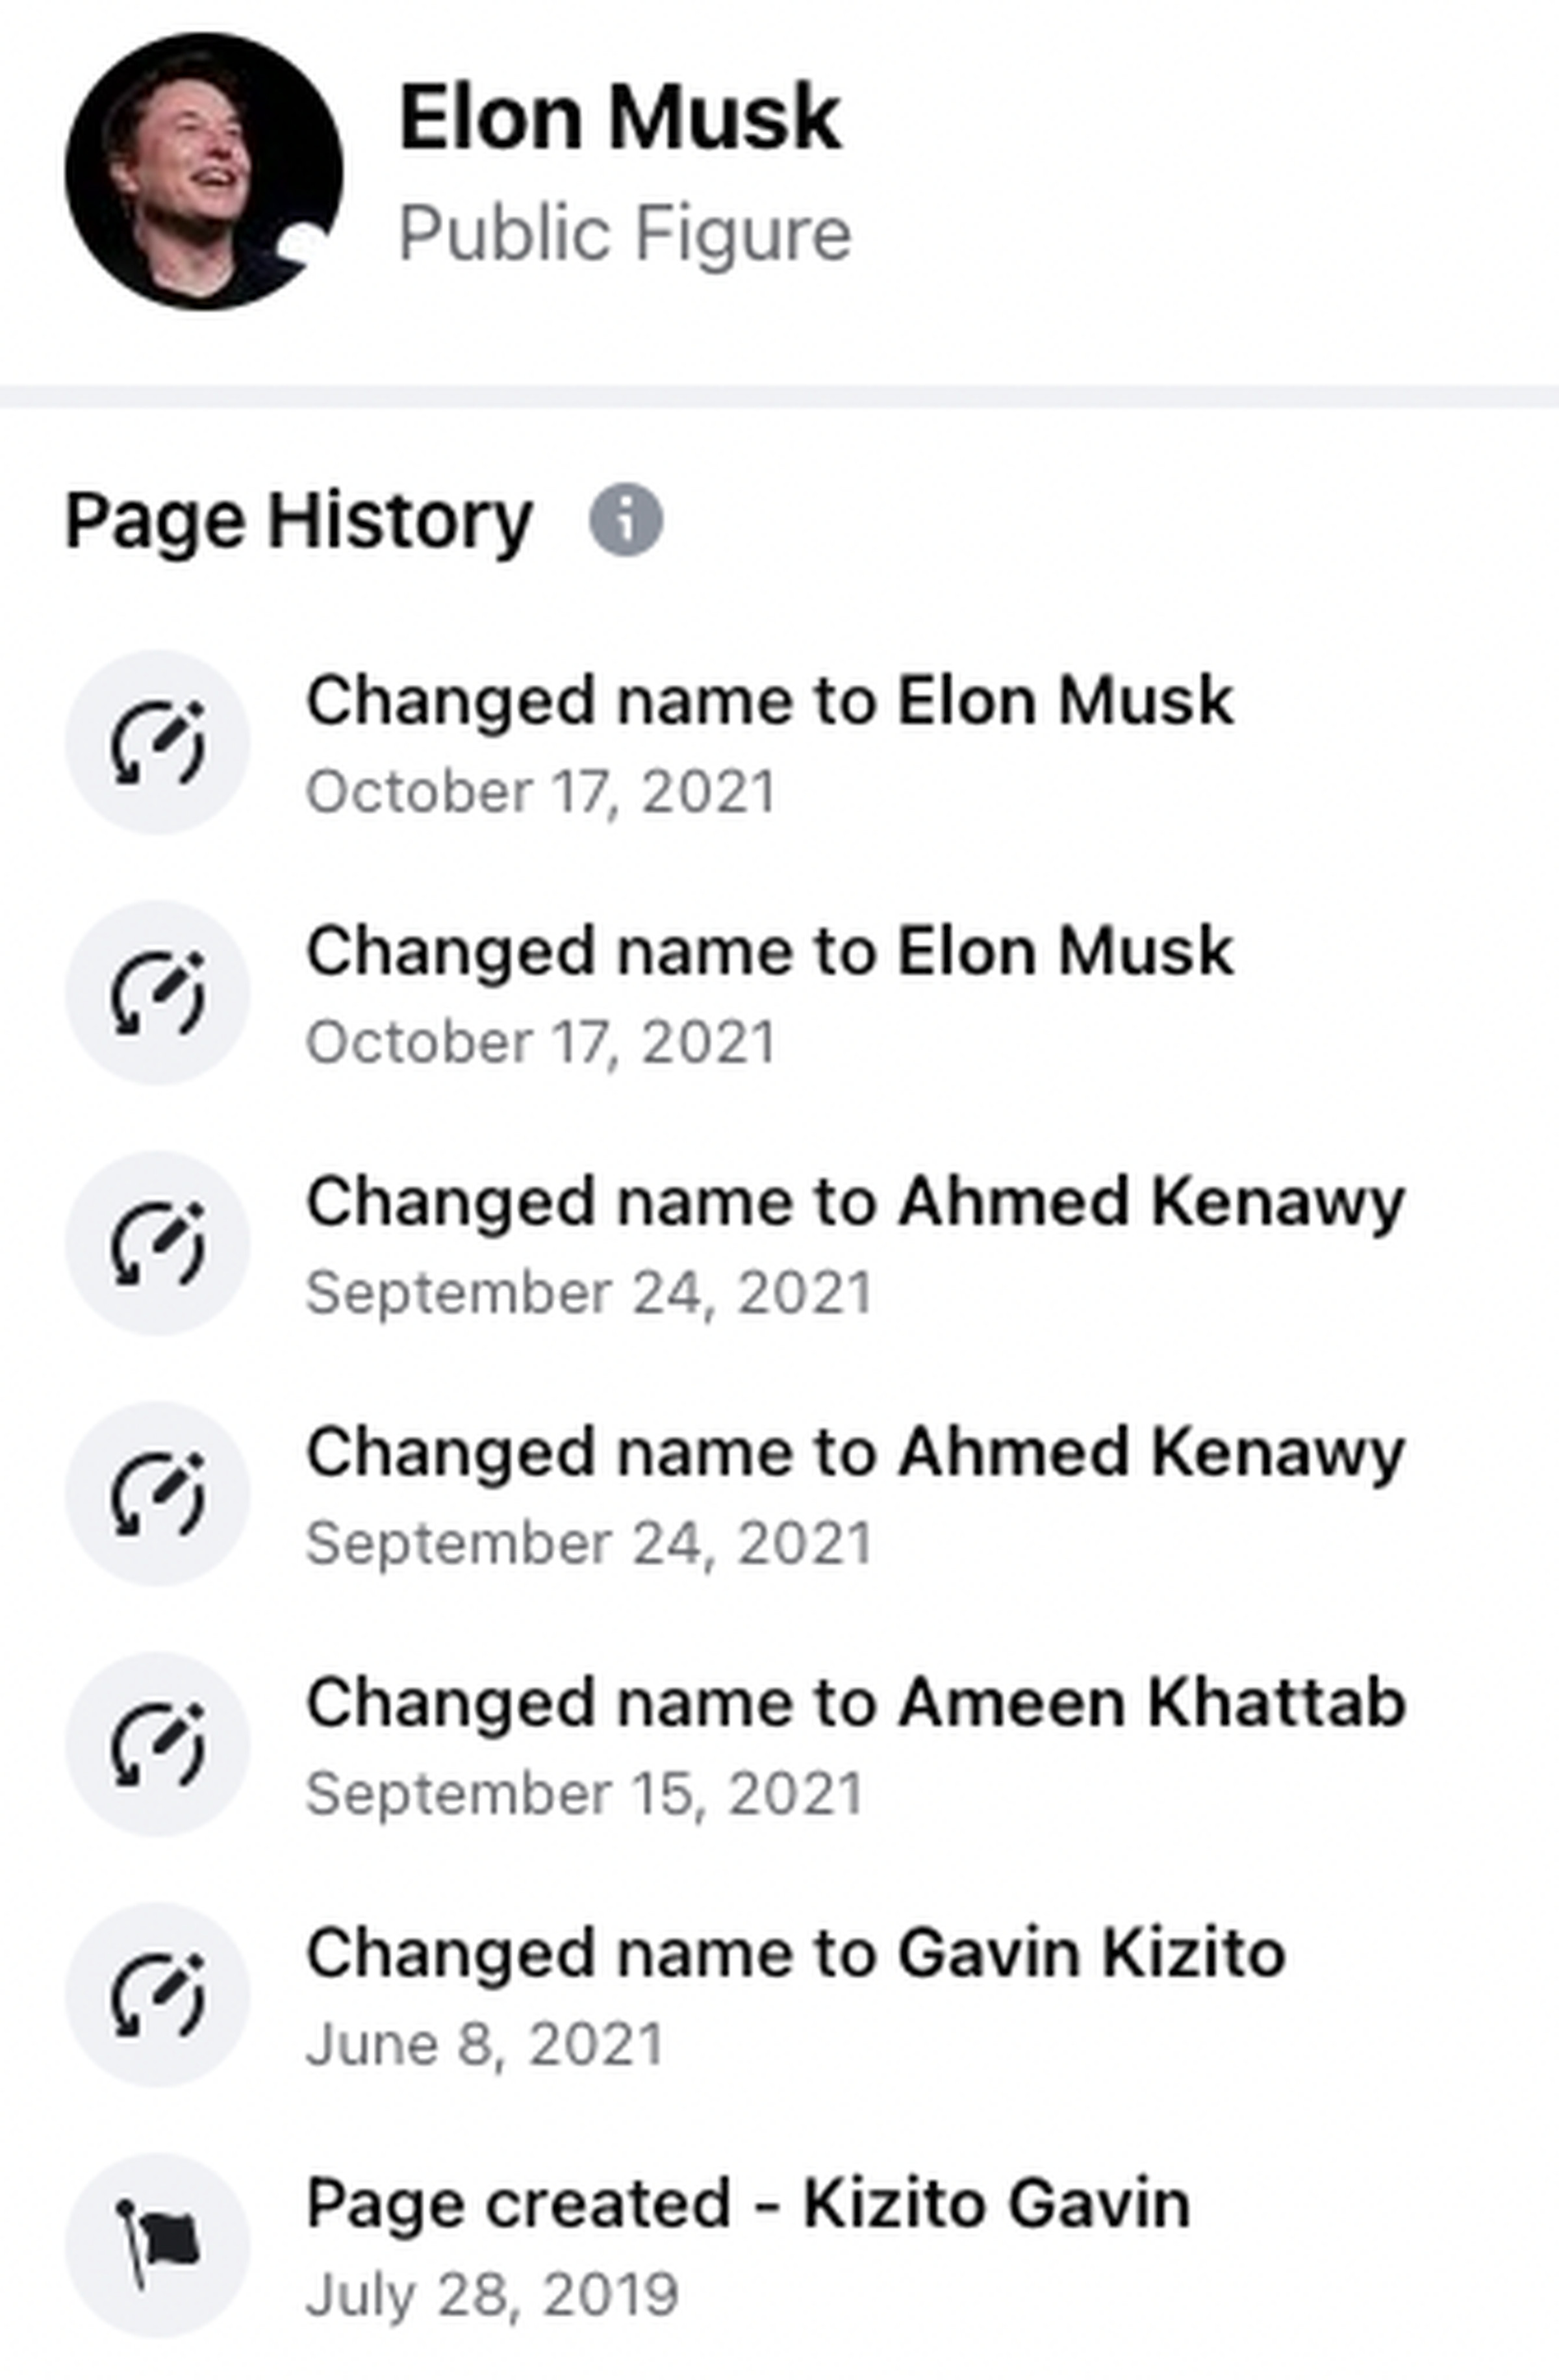 The page started as one for Kizito Gavin, but now apparently is the official one for Elon Musk.